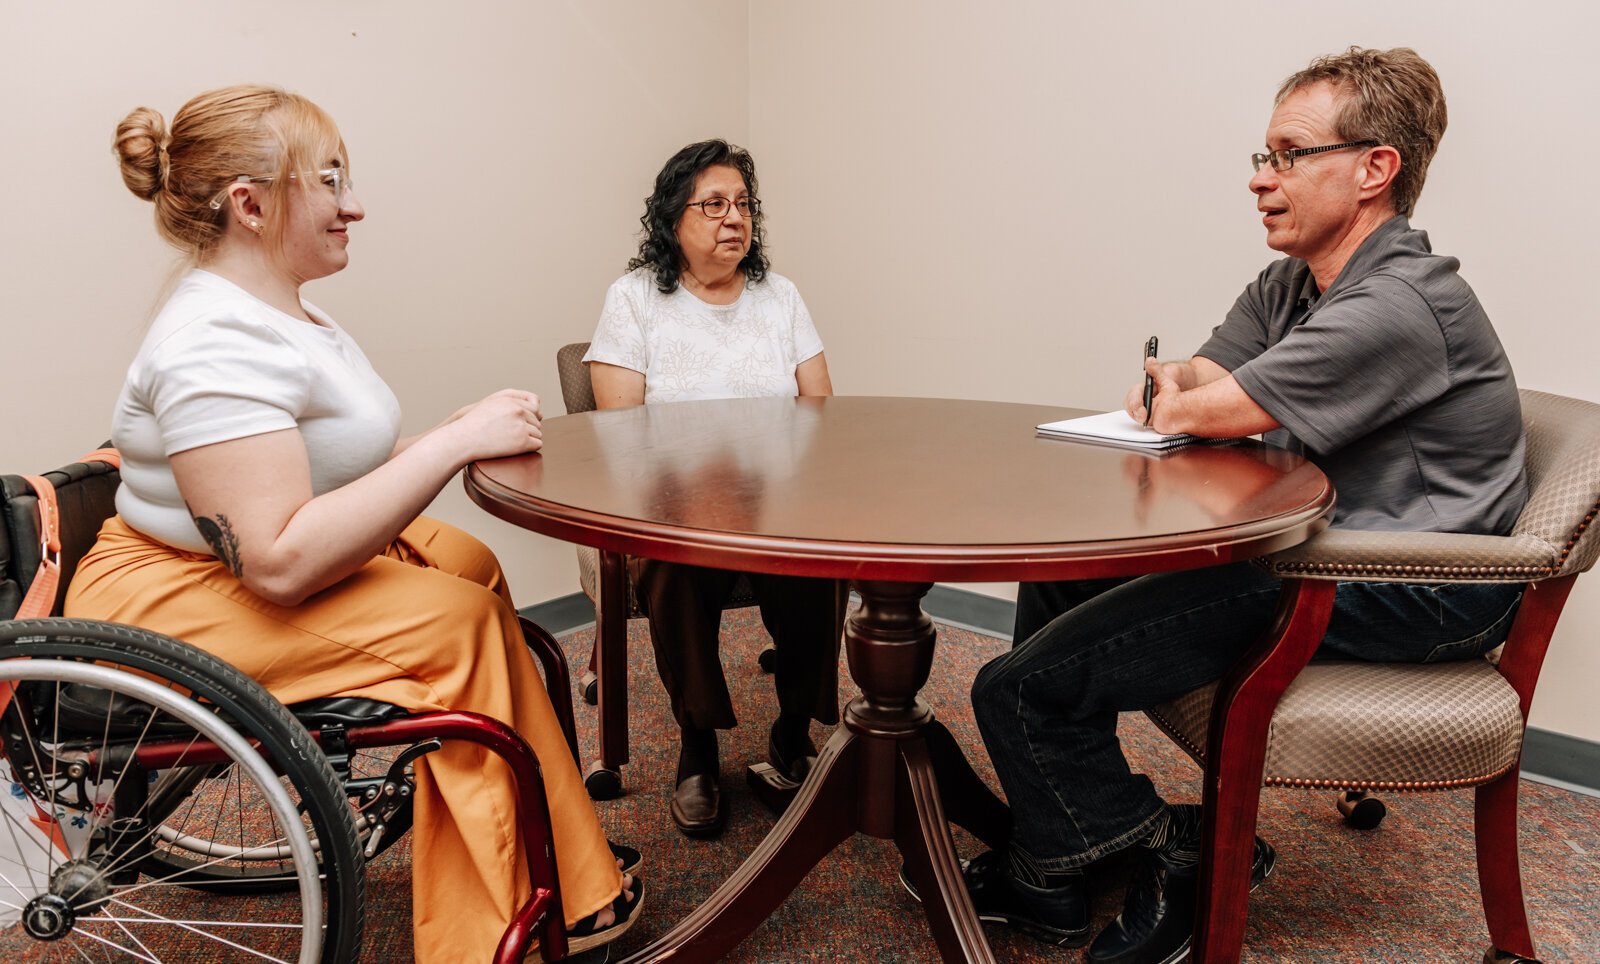 From left: John Guingrich, Moriah Backhaus, and Sylvia Adams have a work meeting at The League For the Blind - Disabled.